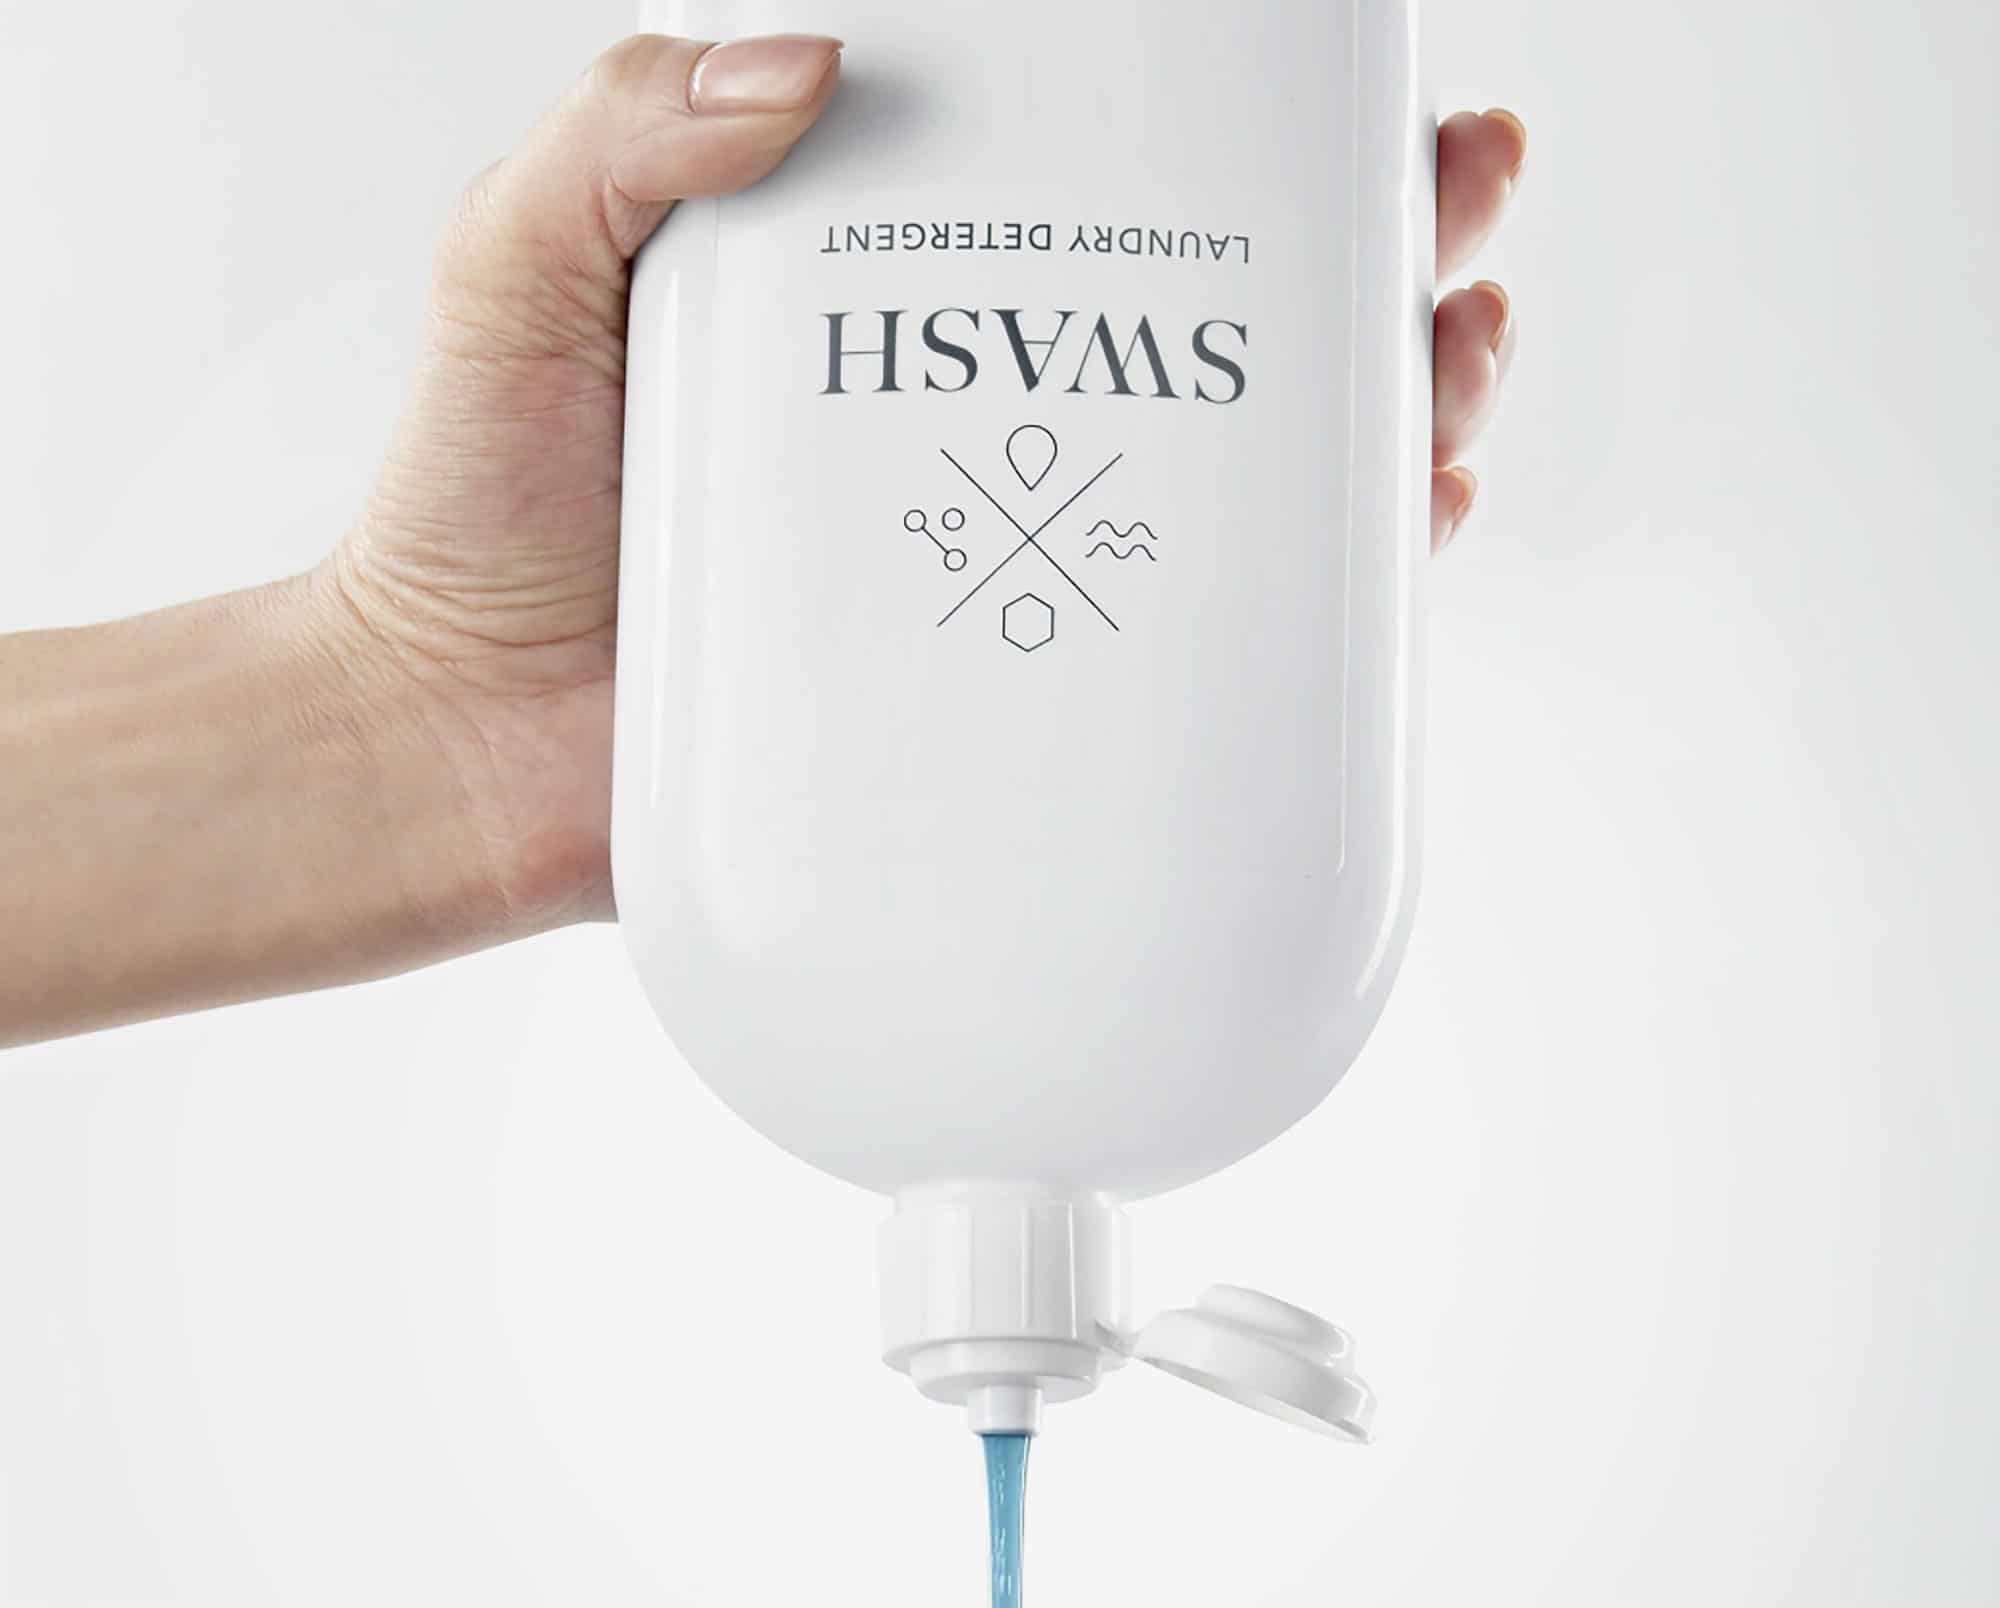 Valve Design: Valve technology in the Precision Pour Cap lets consumers deliver a precise dose of Swash detergent with one satisfying squeeze.